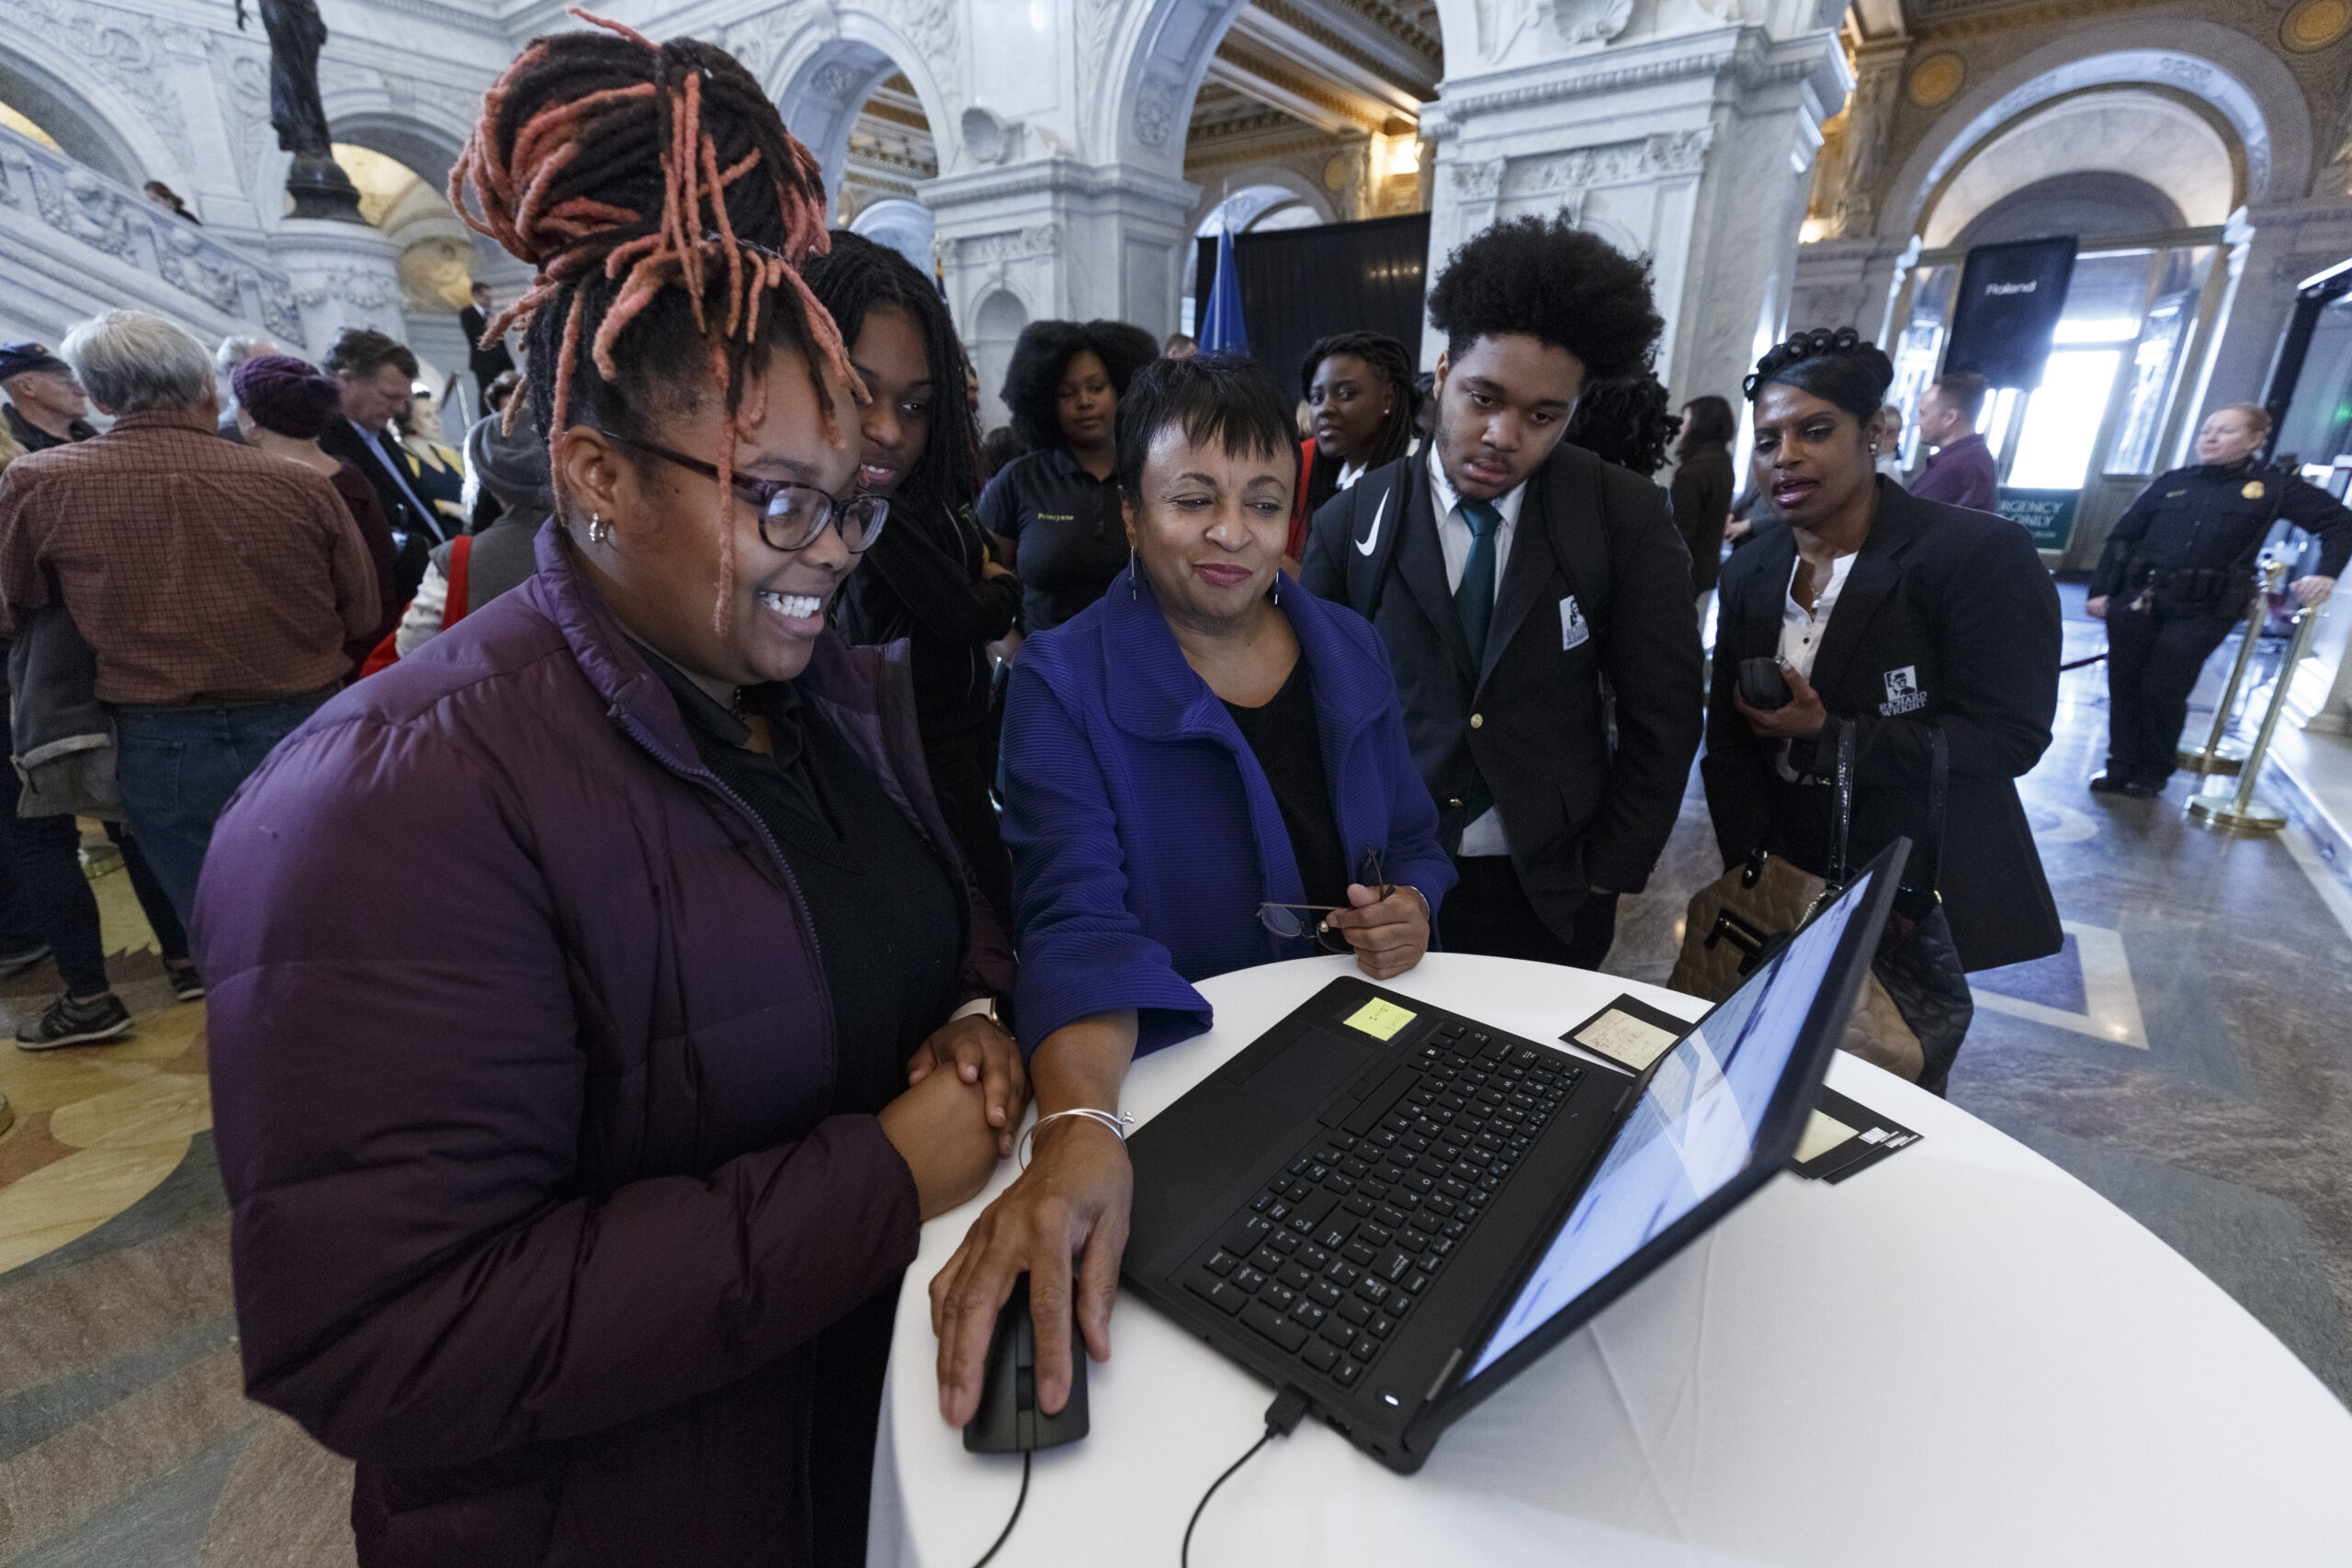 A group of students gather around the Librarian of Congress, Dr. Carla Hayden, to help transcribe document for By the People during an event in 2018. Photo by Shawn Miller.